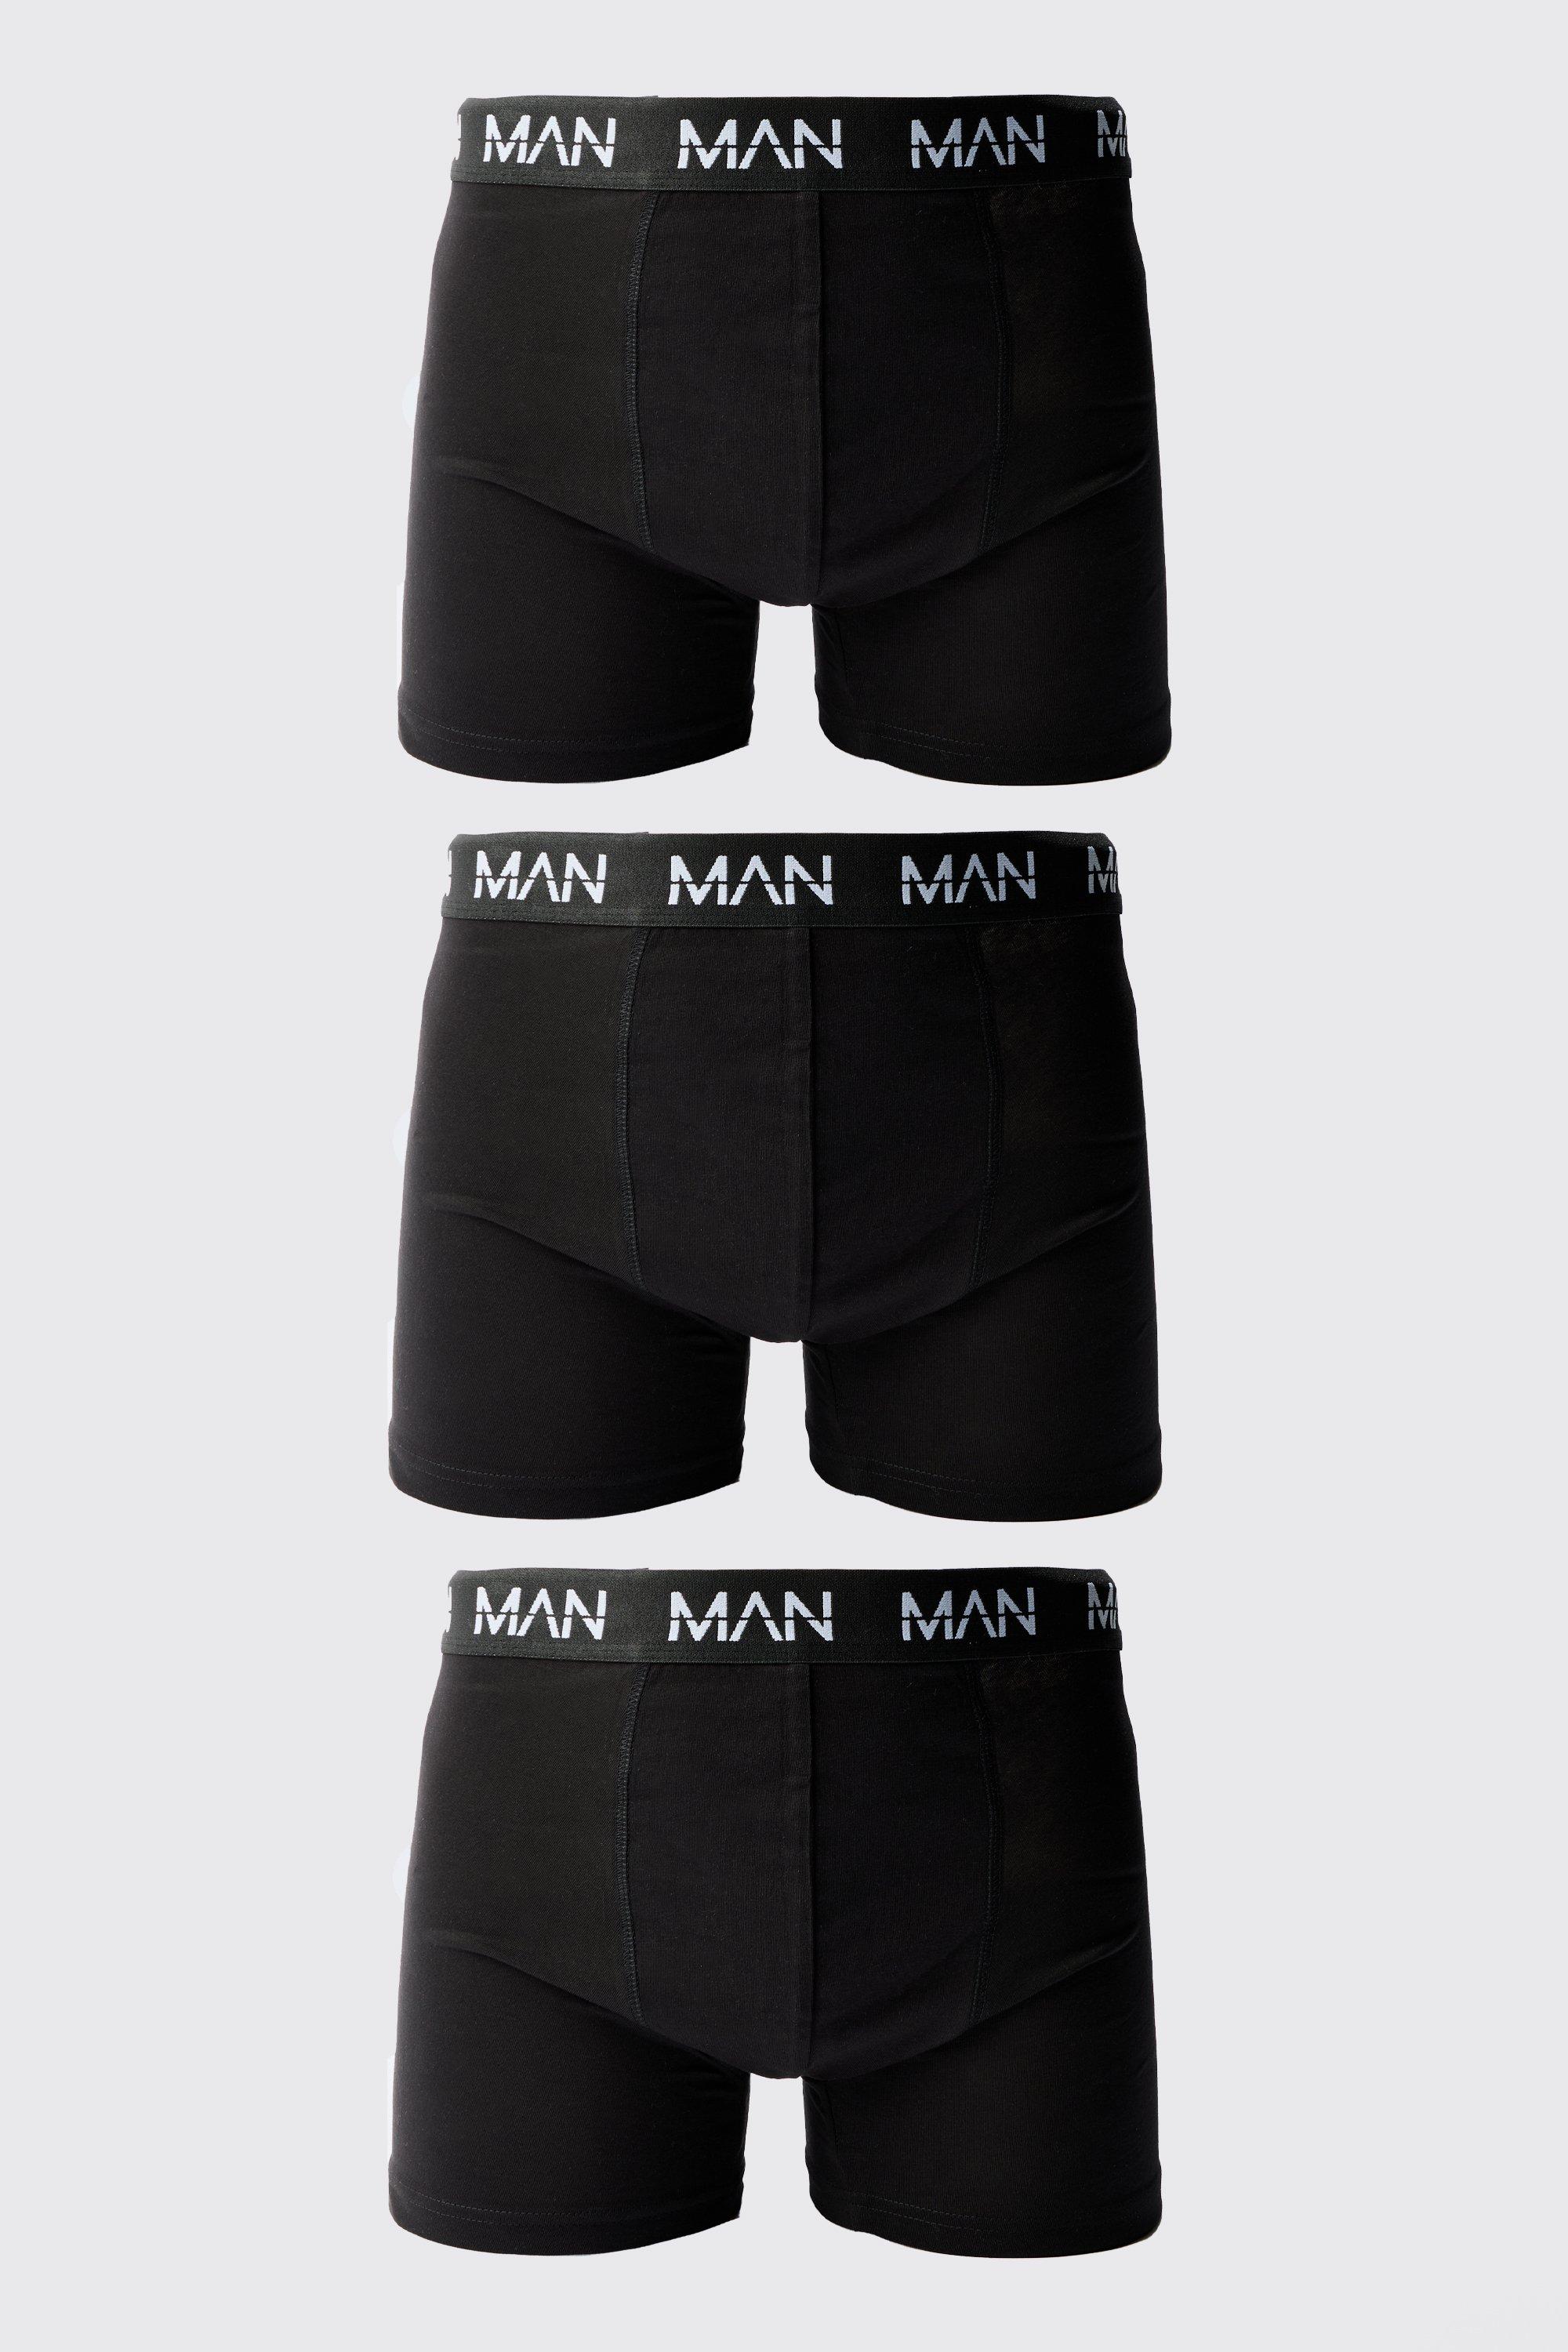 Image of 3 Pack Man Dash Mid Length Trunks, Nero